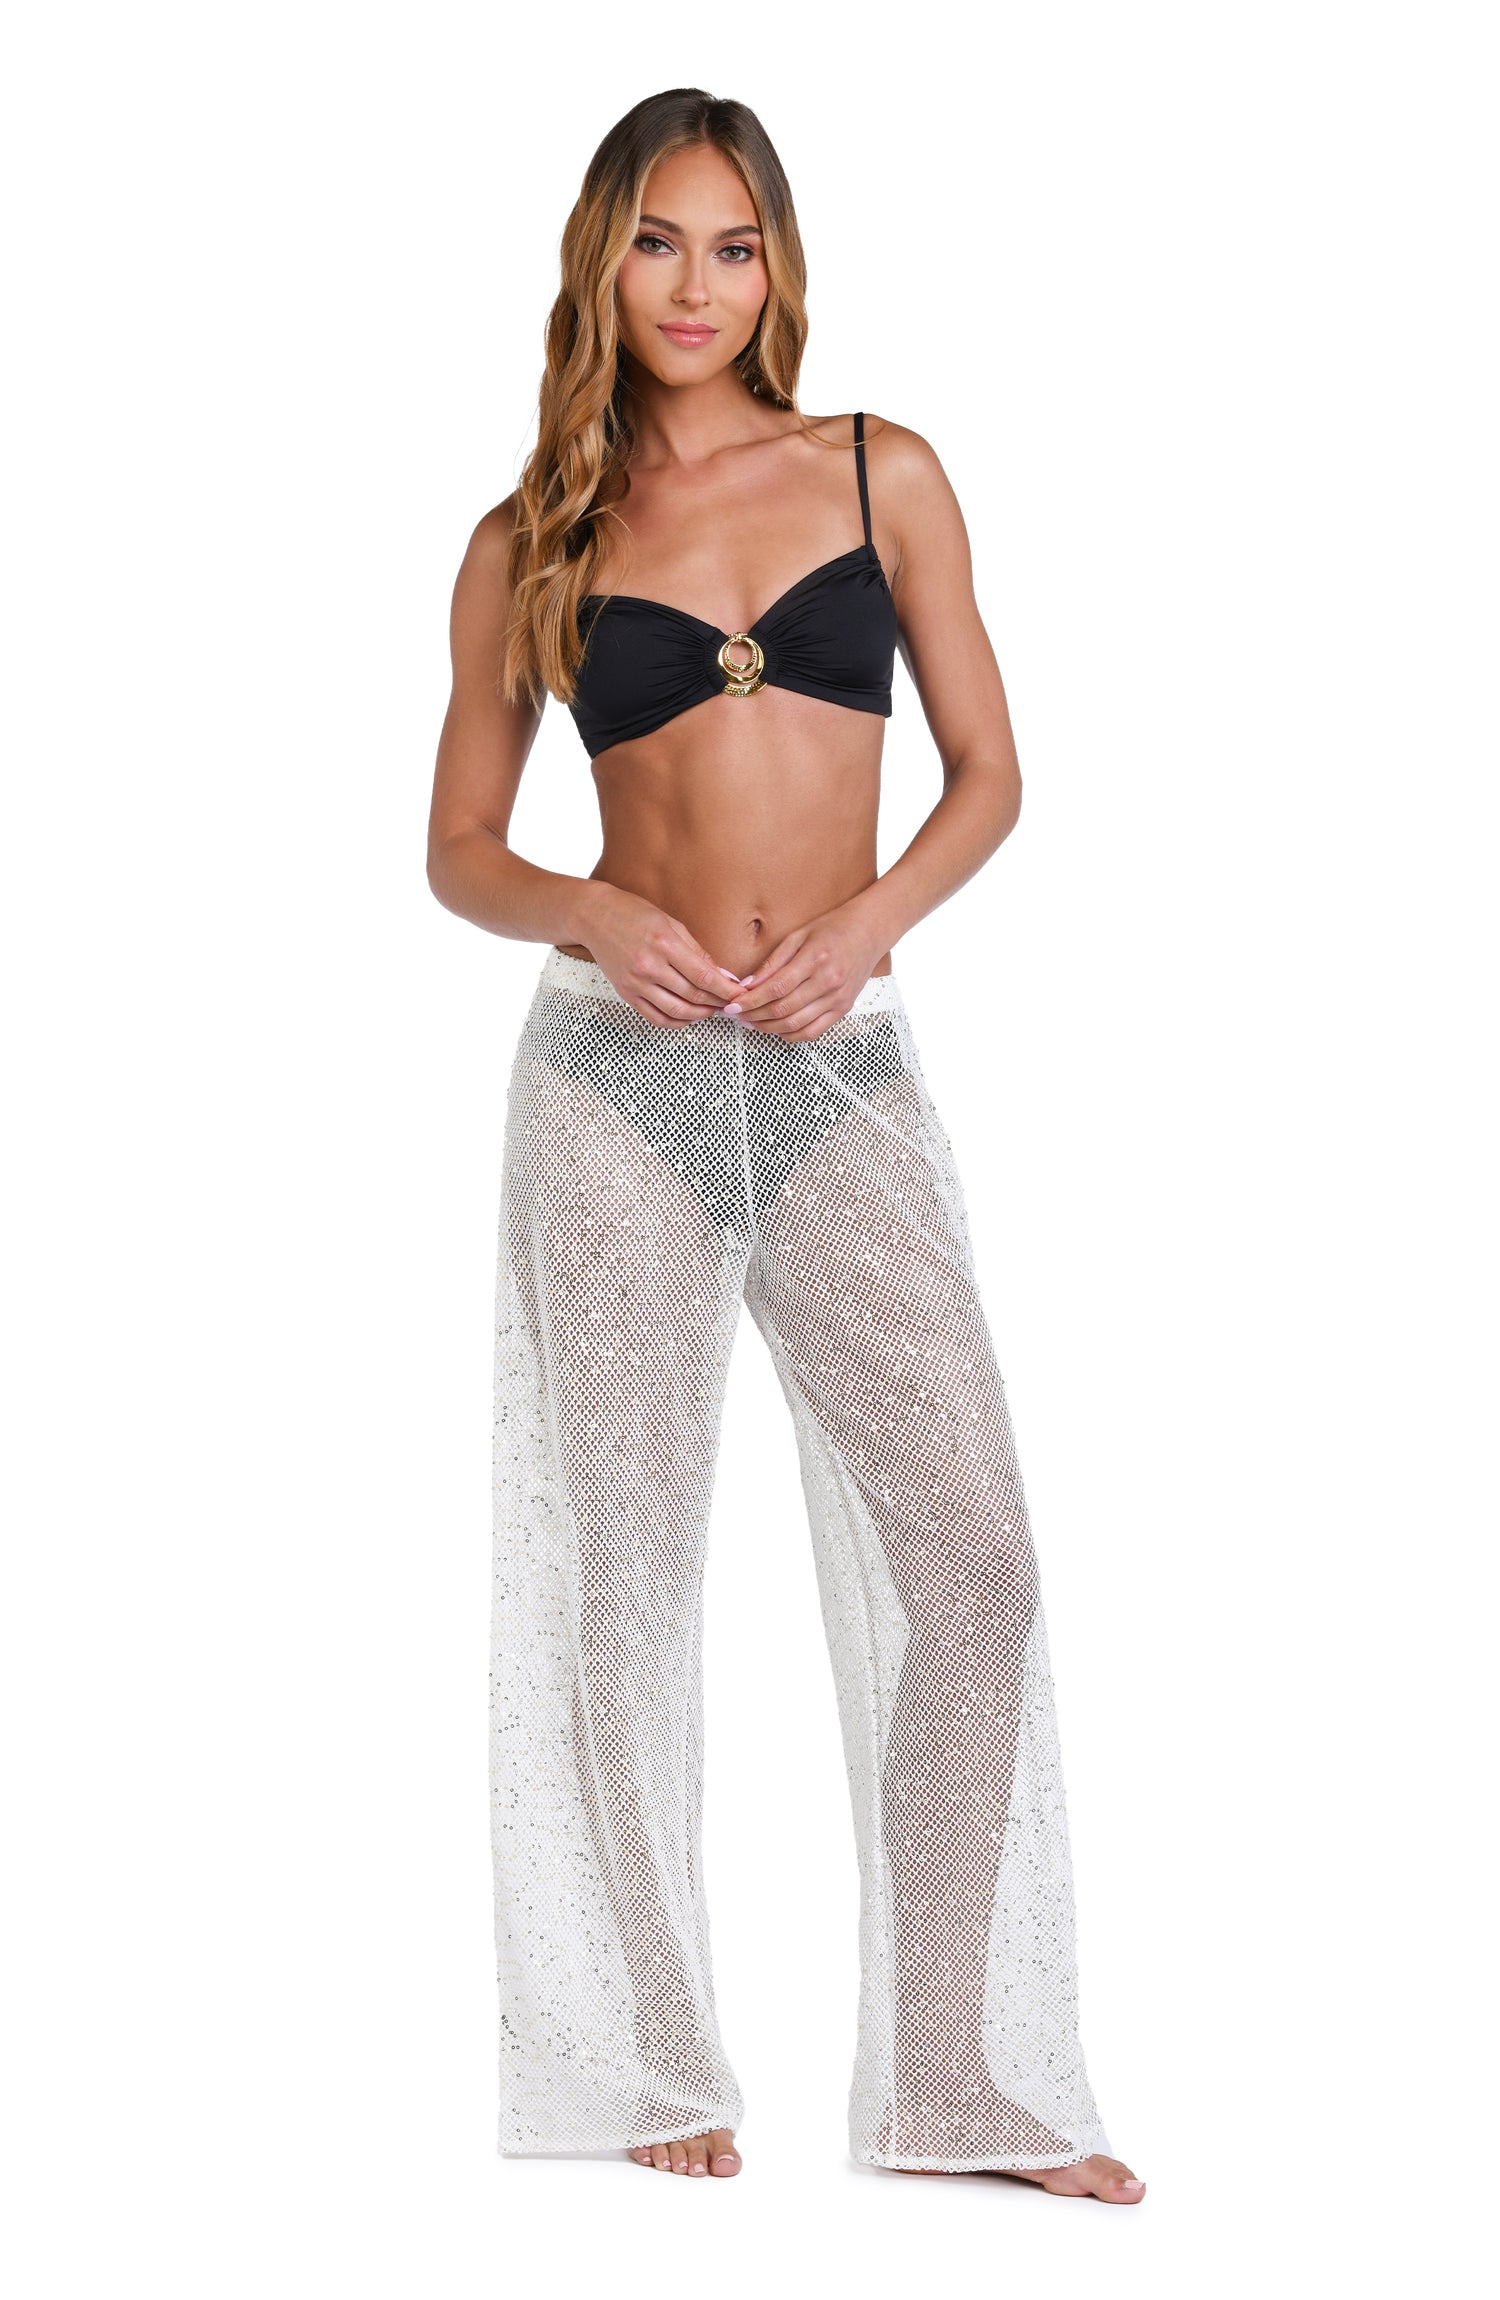 Model is wearing a white colored sheer beach pant cover up.